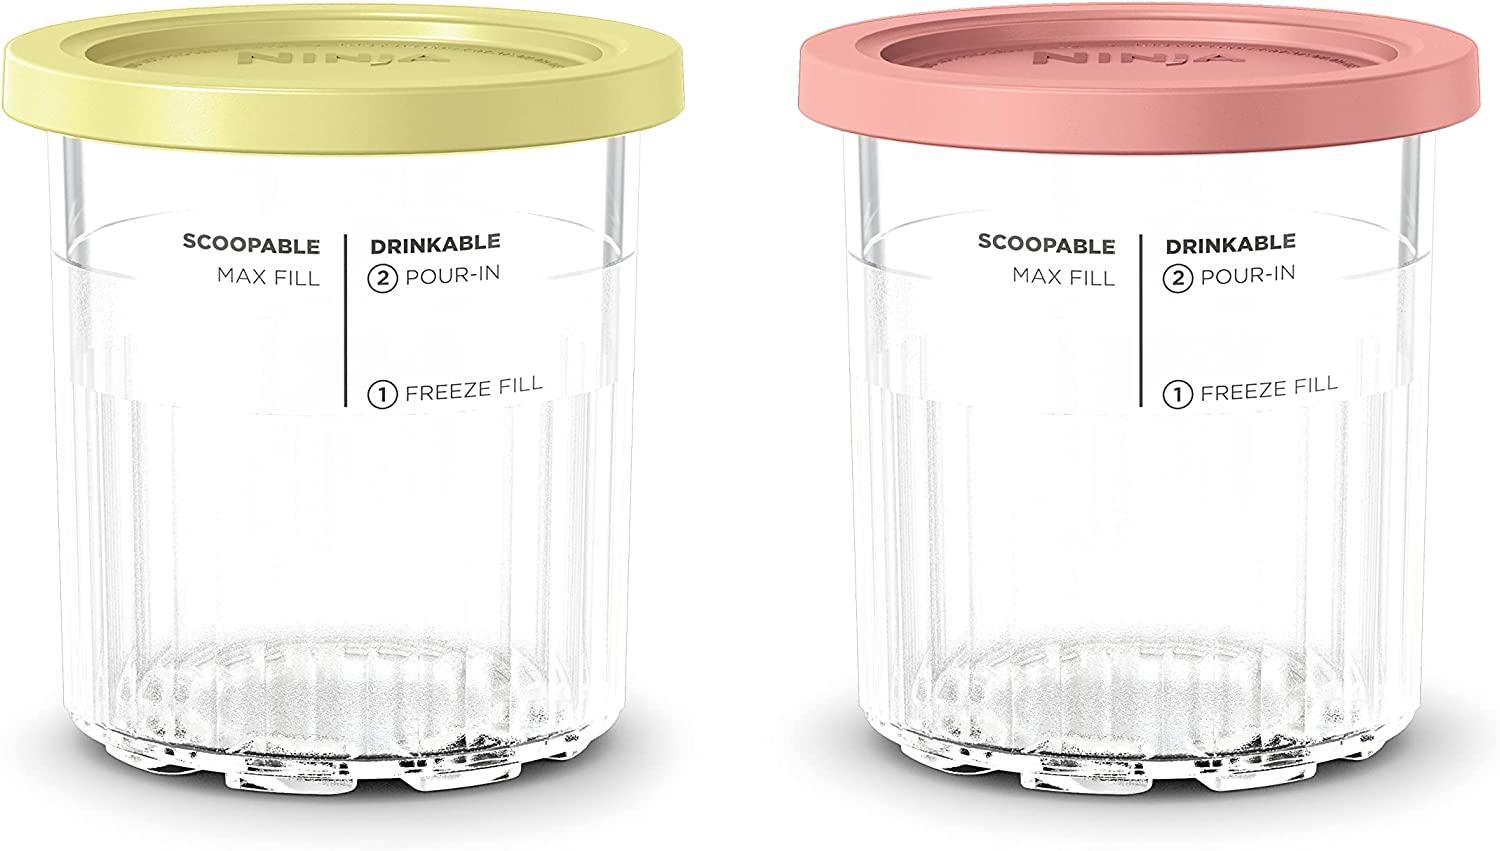  Ninja Creami Deluxe Pints 2 Pack, Compatible with NC500 Series Creami  Deluxe Ice Cream Makers, Genuine Ninja Pint, BPA-Free & Dishwasher Safe,  Color Lids, 1 Pint Each, Clear/Coral/Yellow, XSKPNTLD2​: Home 